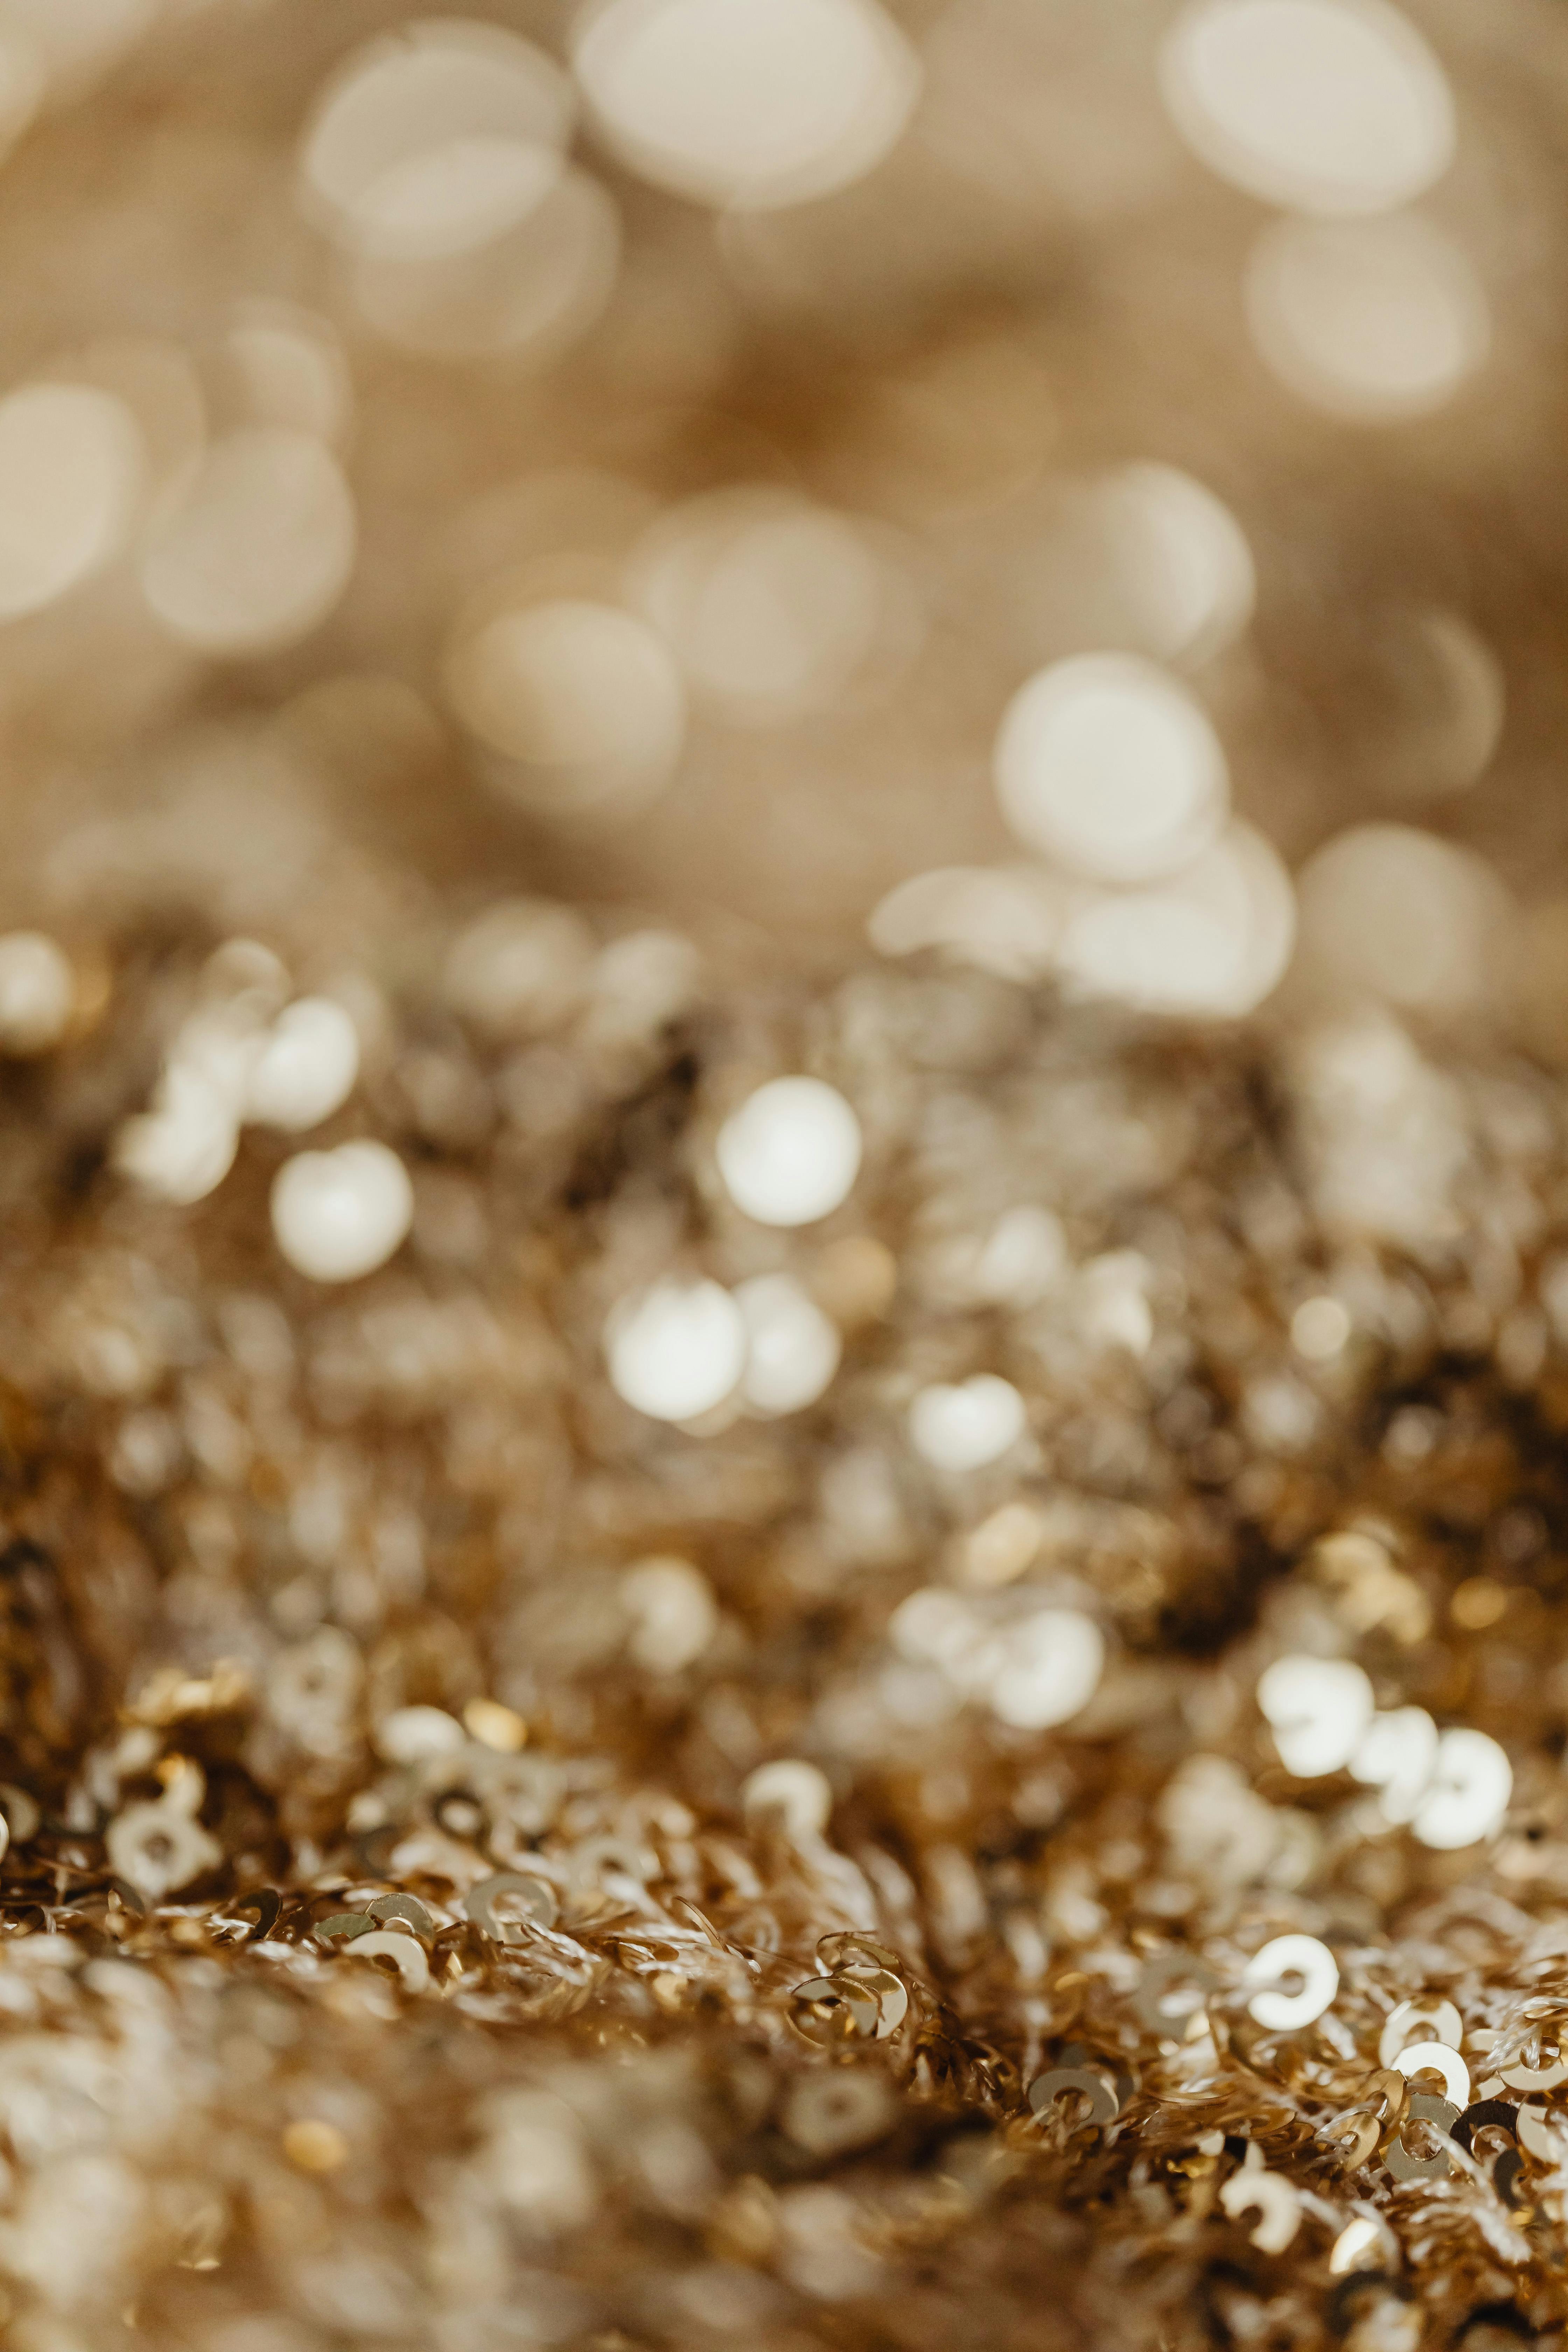 Close Up Of Many Shiny Gold Sequins Stock Photo, Picture and Royalty Free  Image. Image 19047878.